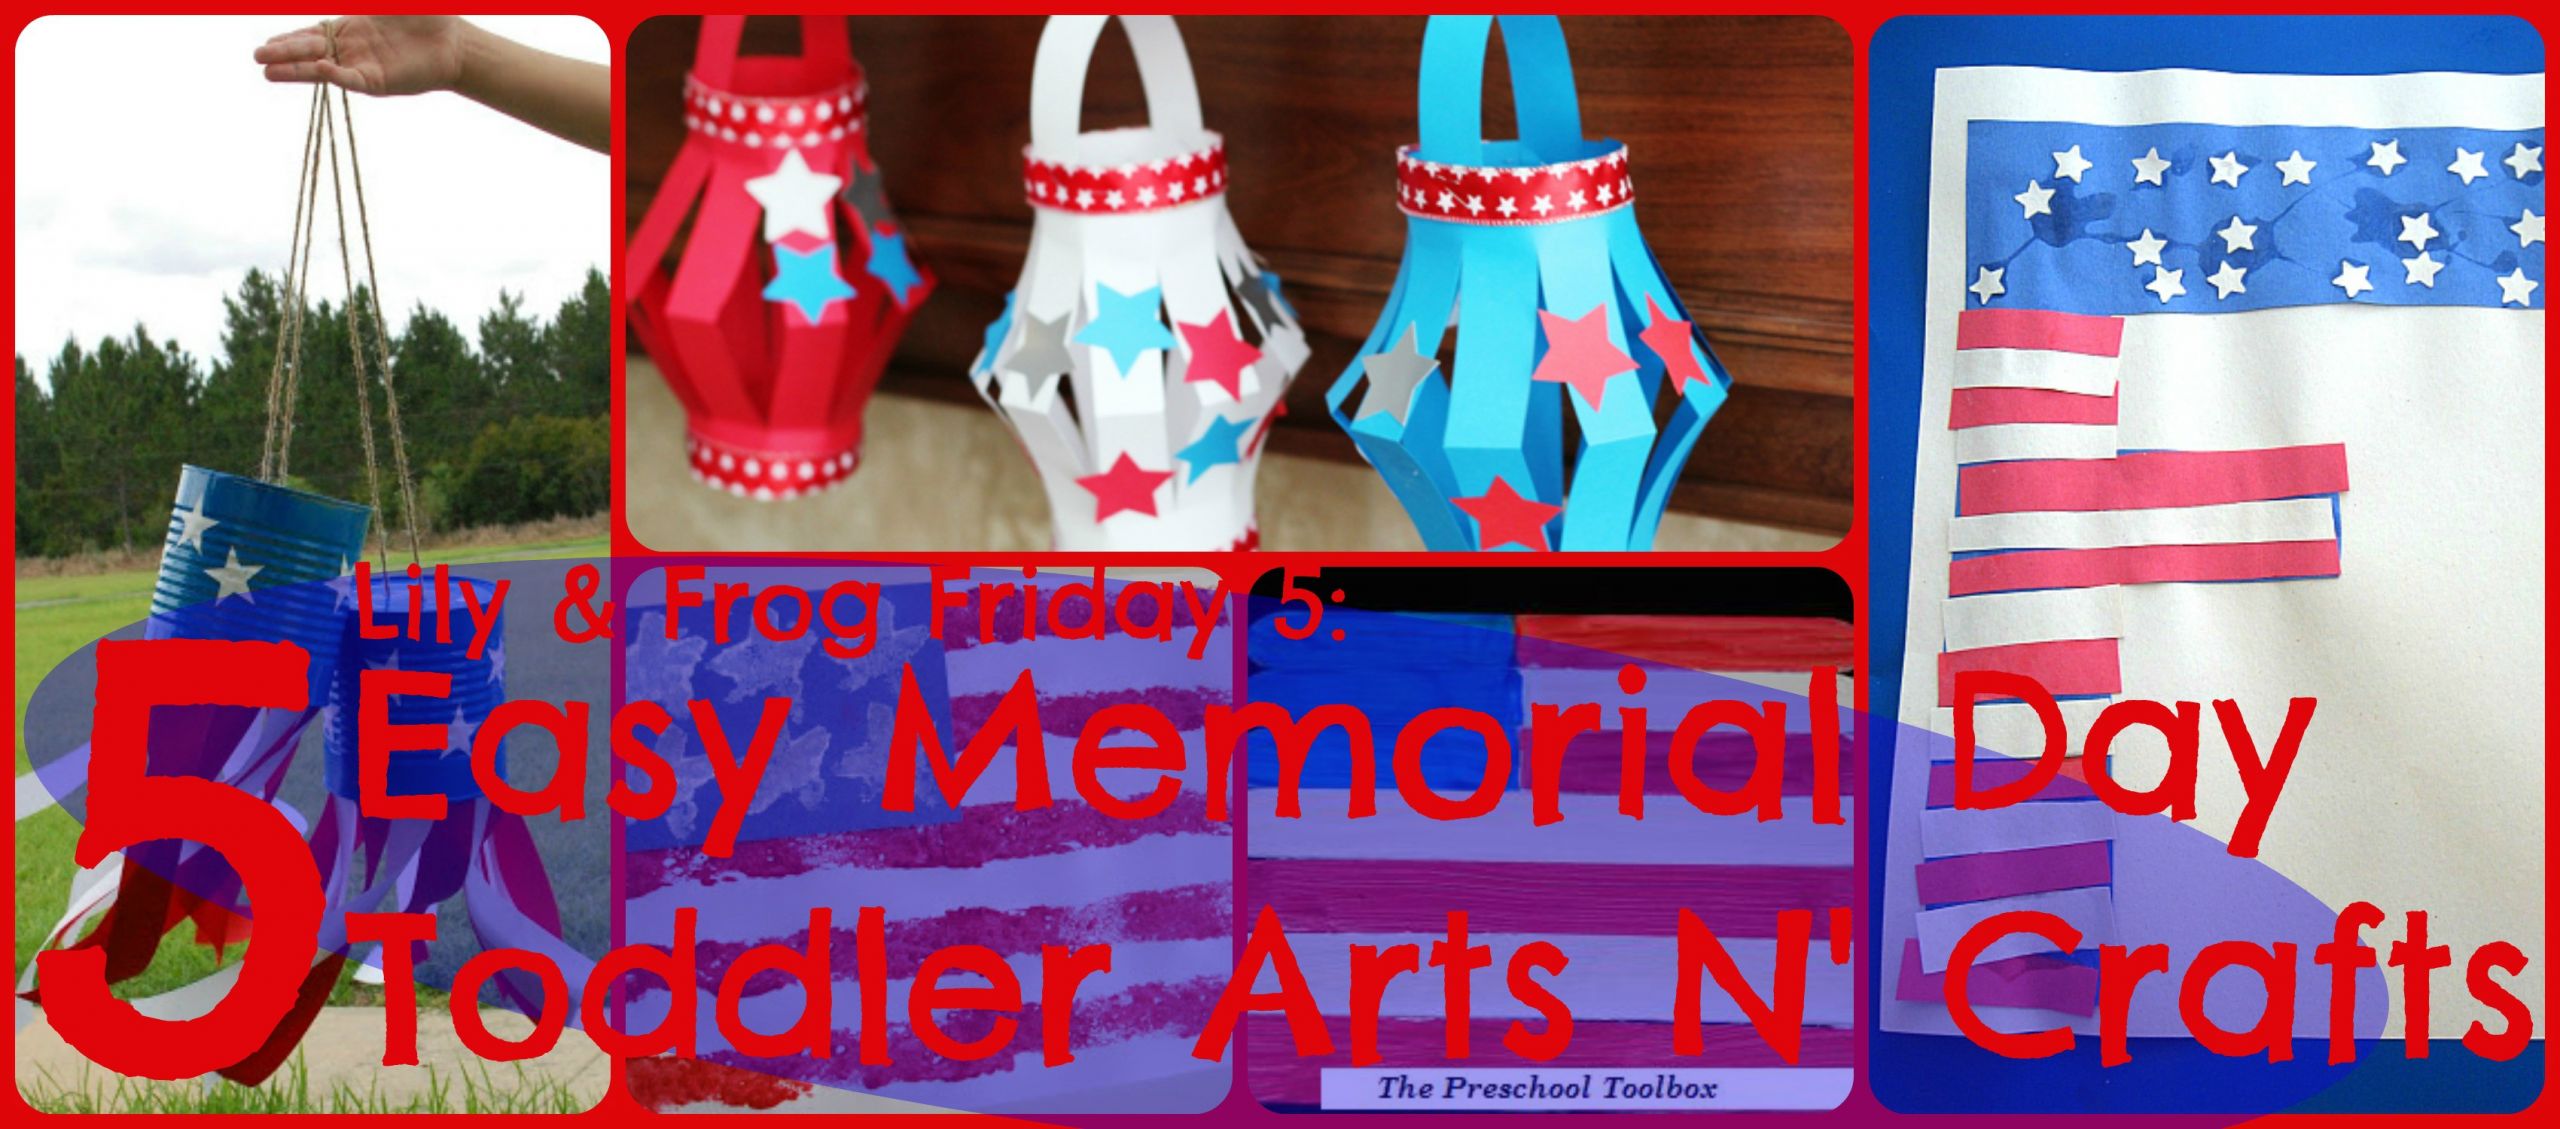 Memorial Day Craft For Toddlers
 Lily & Frog Friday 5 5 Easy Memorial Day Toddler Arts N